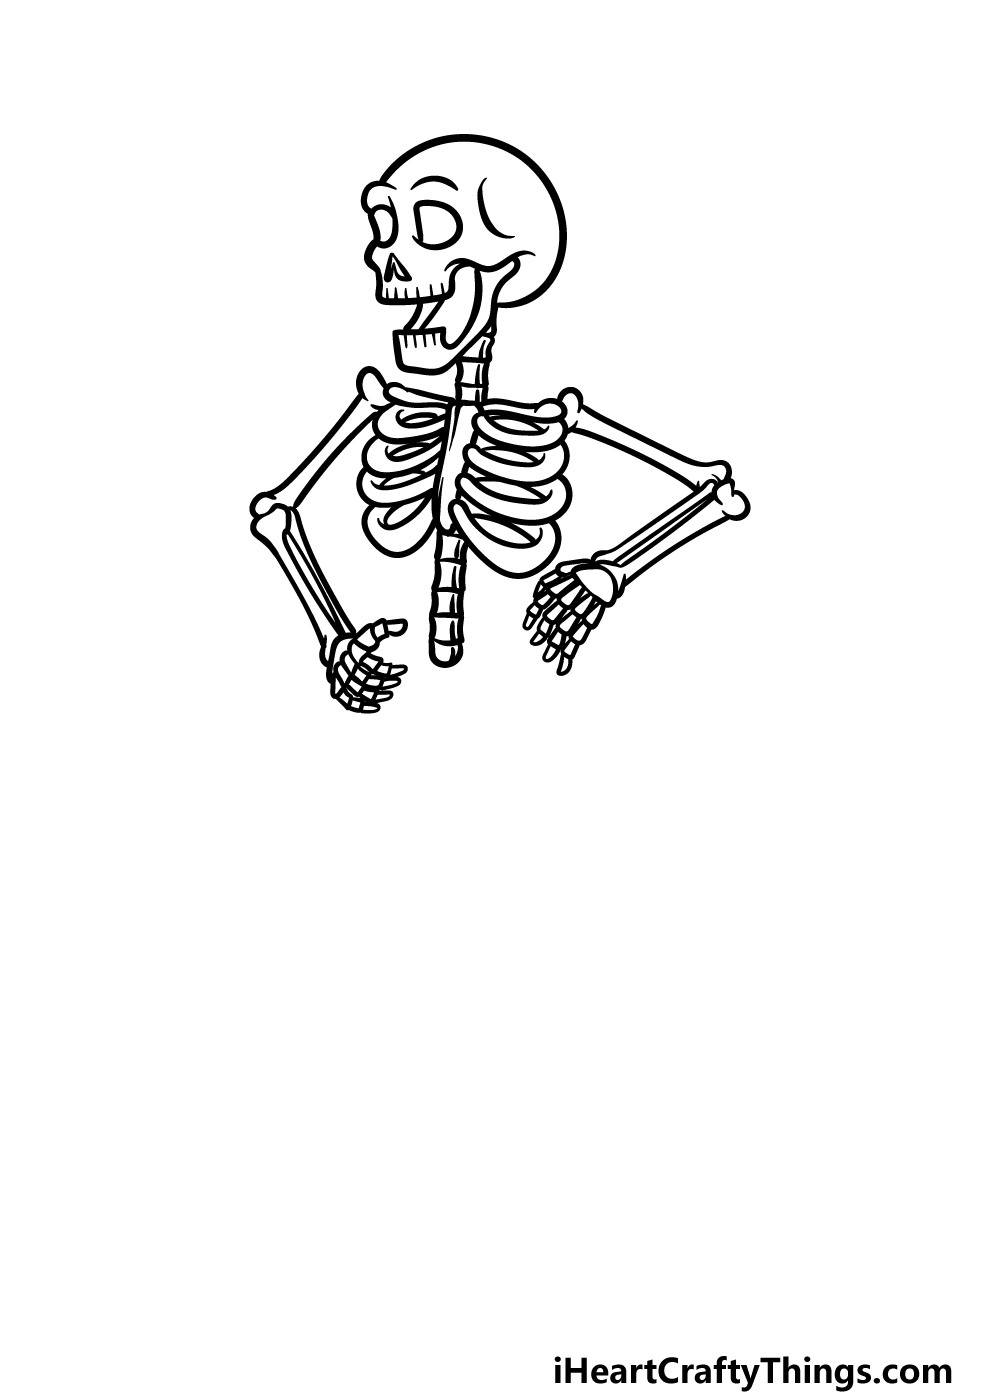 Cartoon Skeleton Drawing - How To Draw A Cartoon Skeleton Step By Step